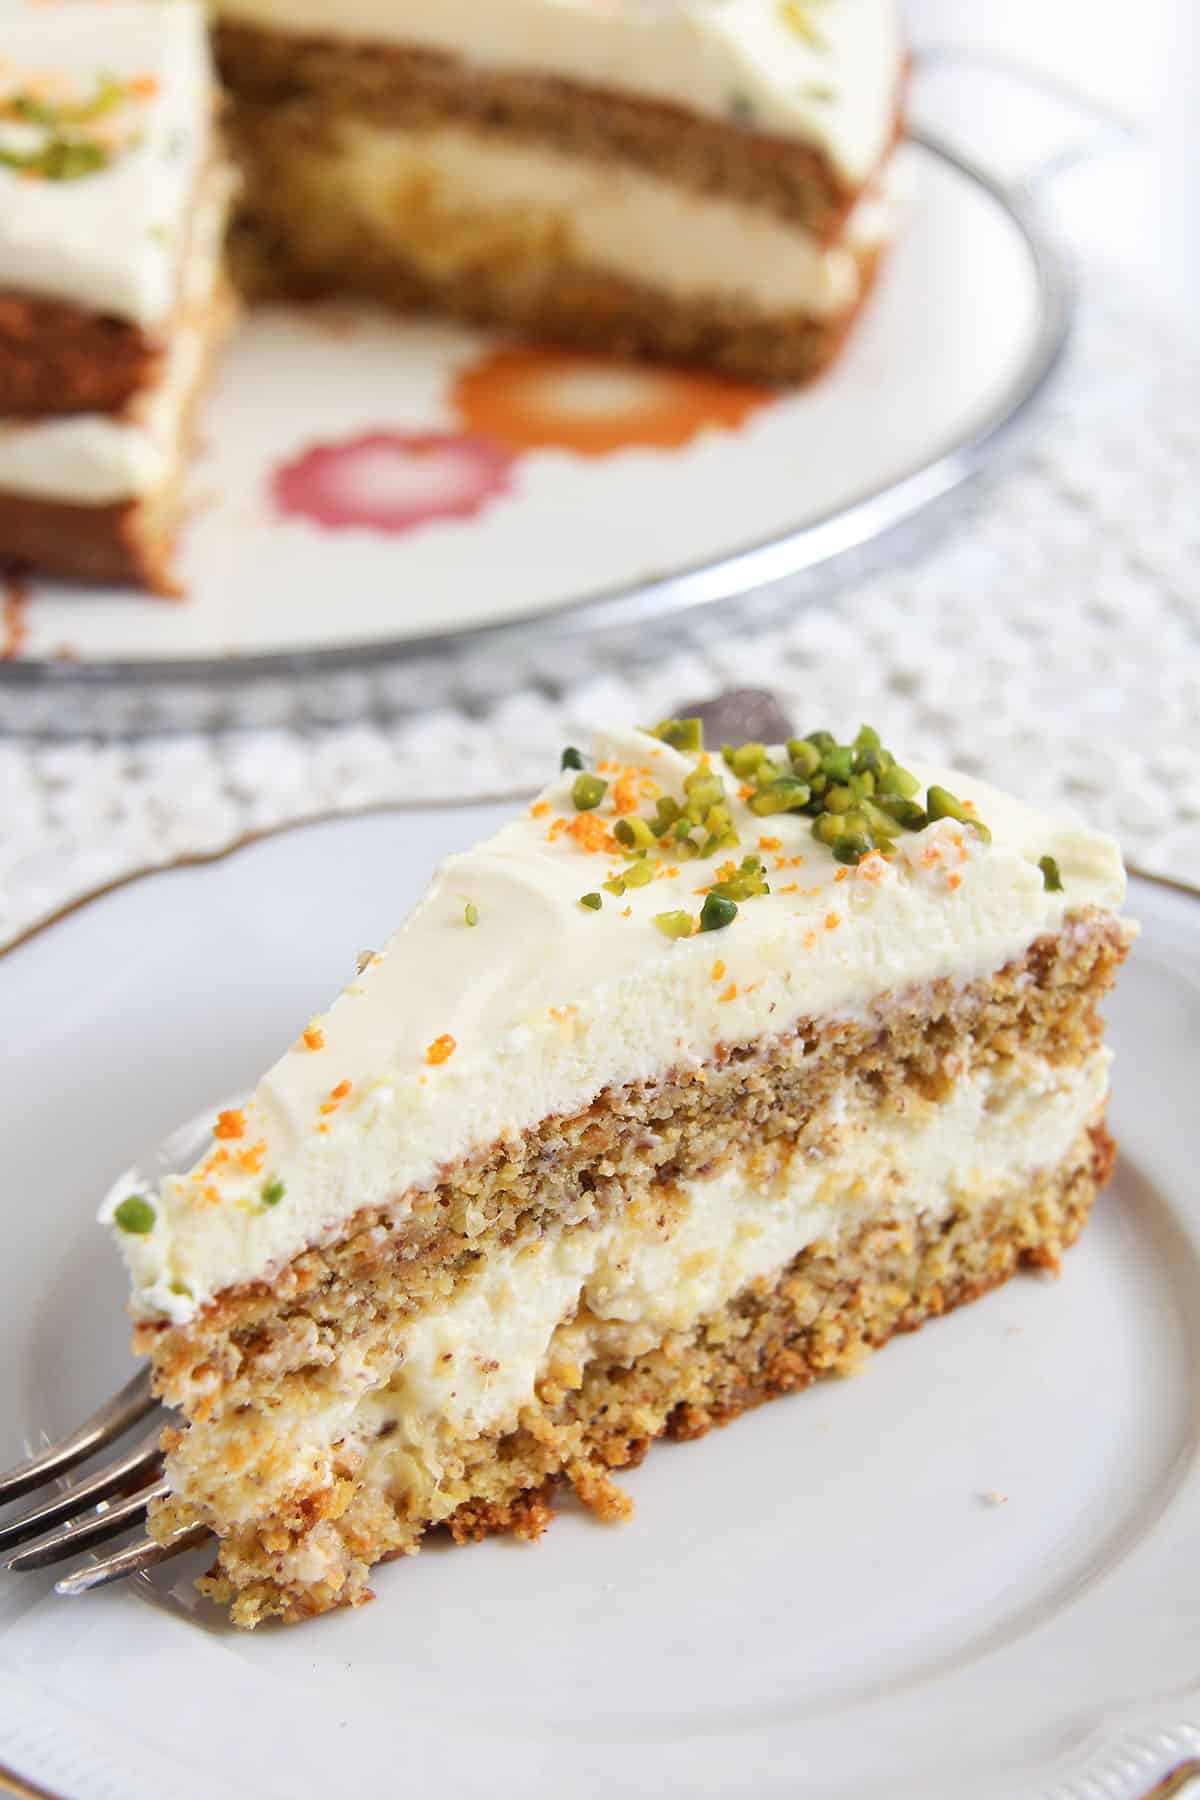 slice of layered carrot cake with almonds and orange cream filling. 